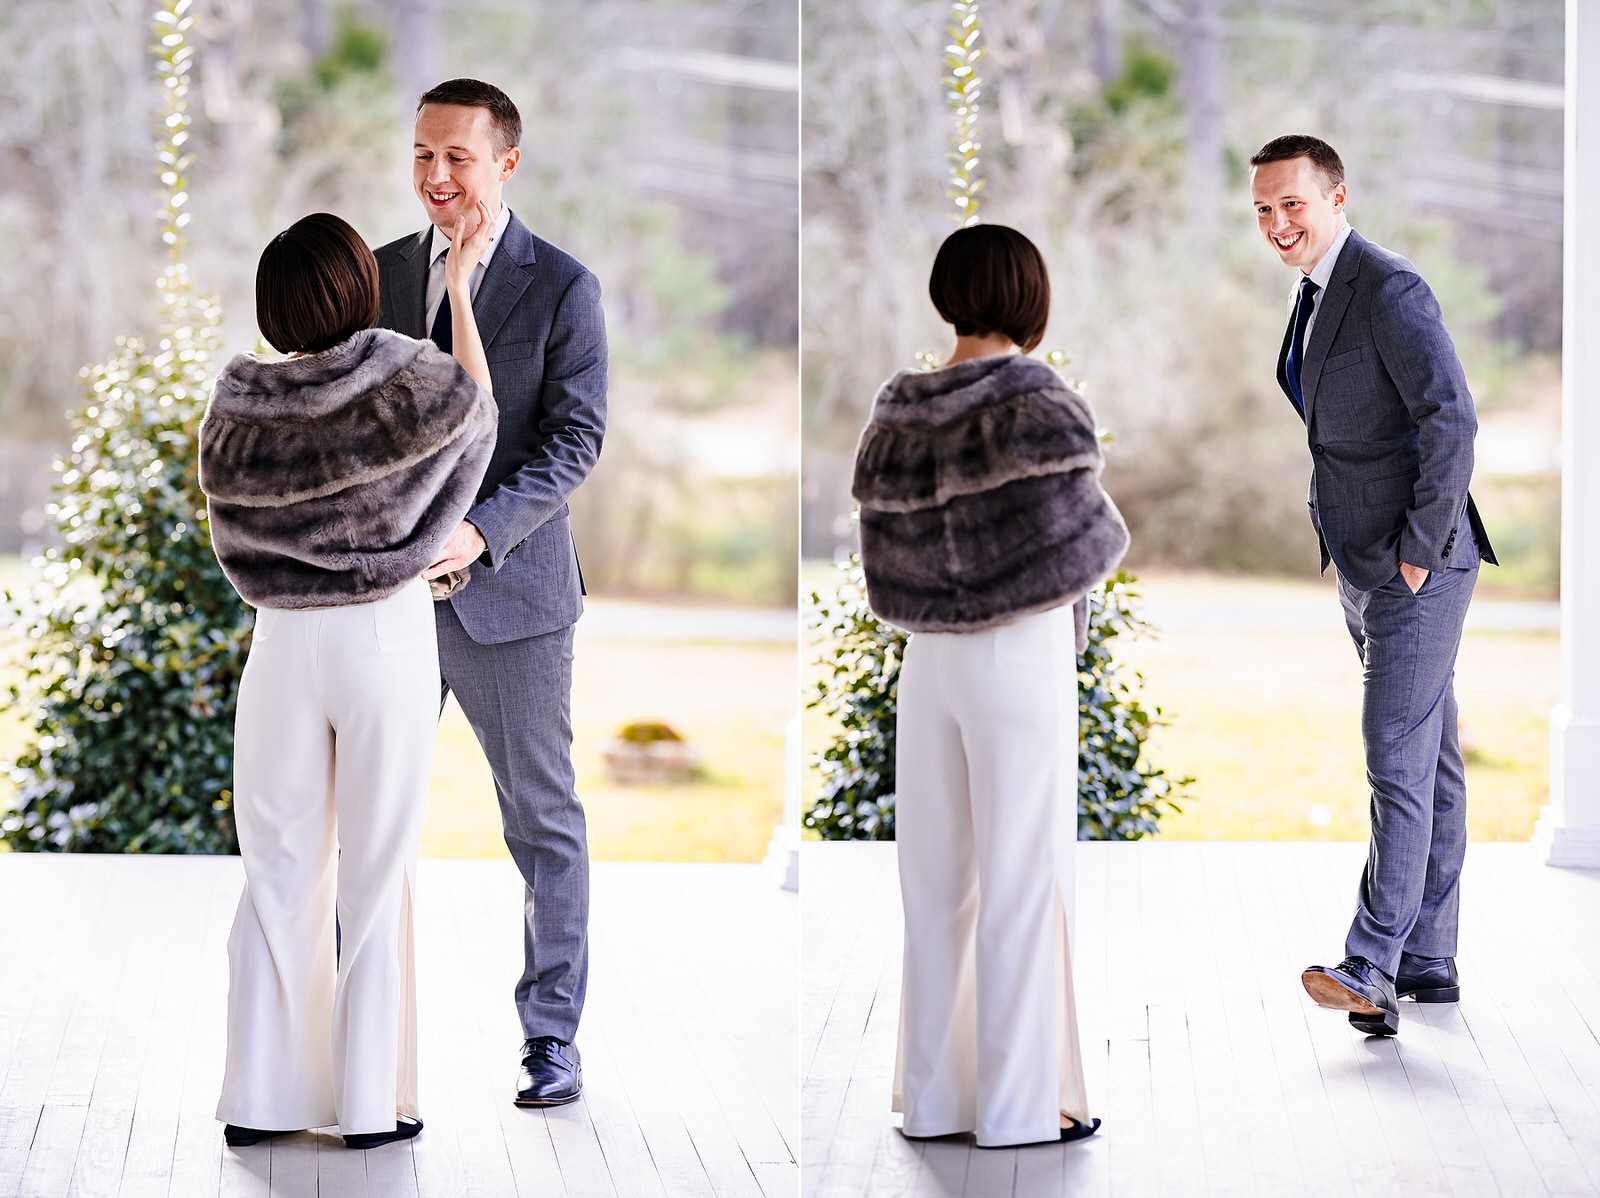 Durham elopement first look - sweet reaction by groom